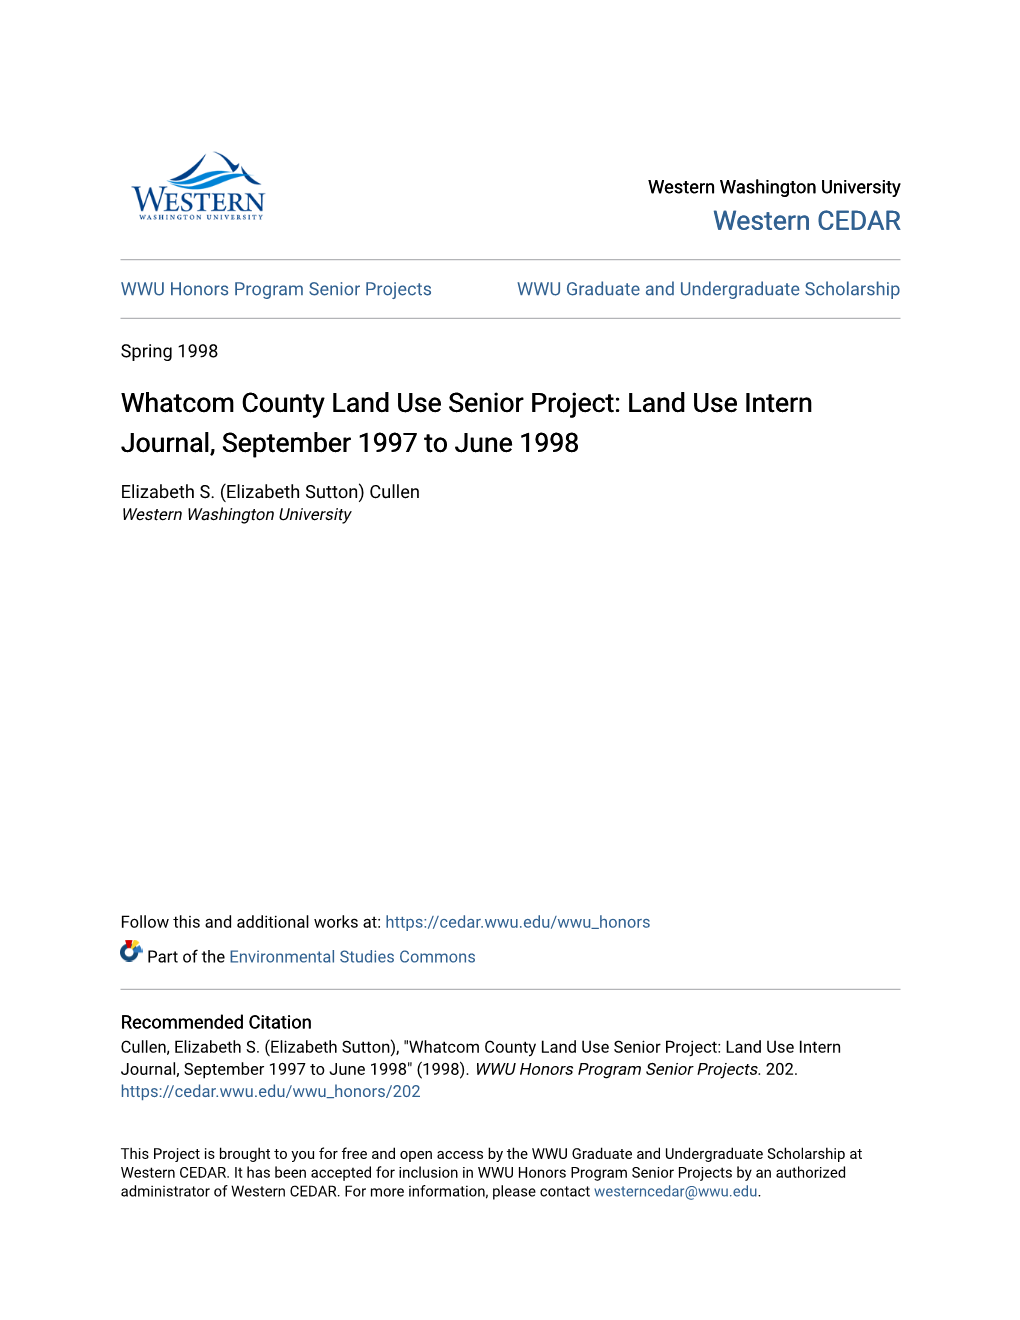 Whatcom County Land Use Senior Project: Land Use Intern Journal, September 1997 to June 1998